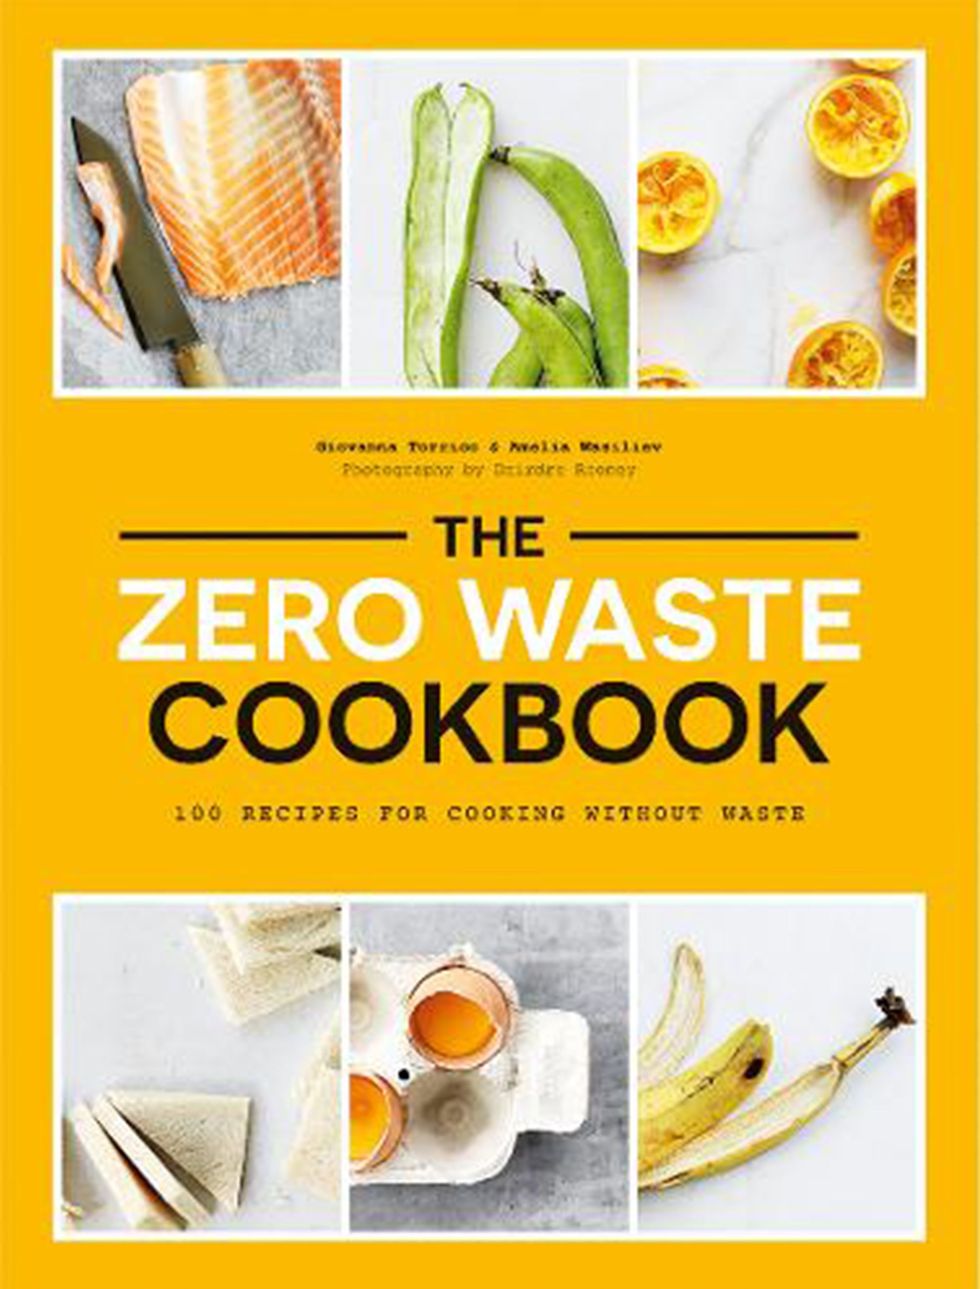  The Zero Waste Cookbook: 100 Recipes for Cooking Without Waste